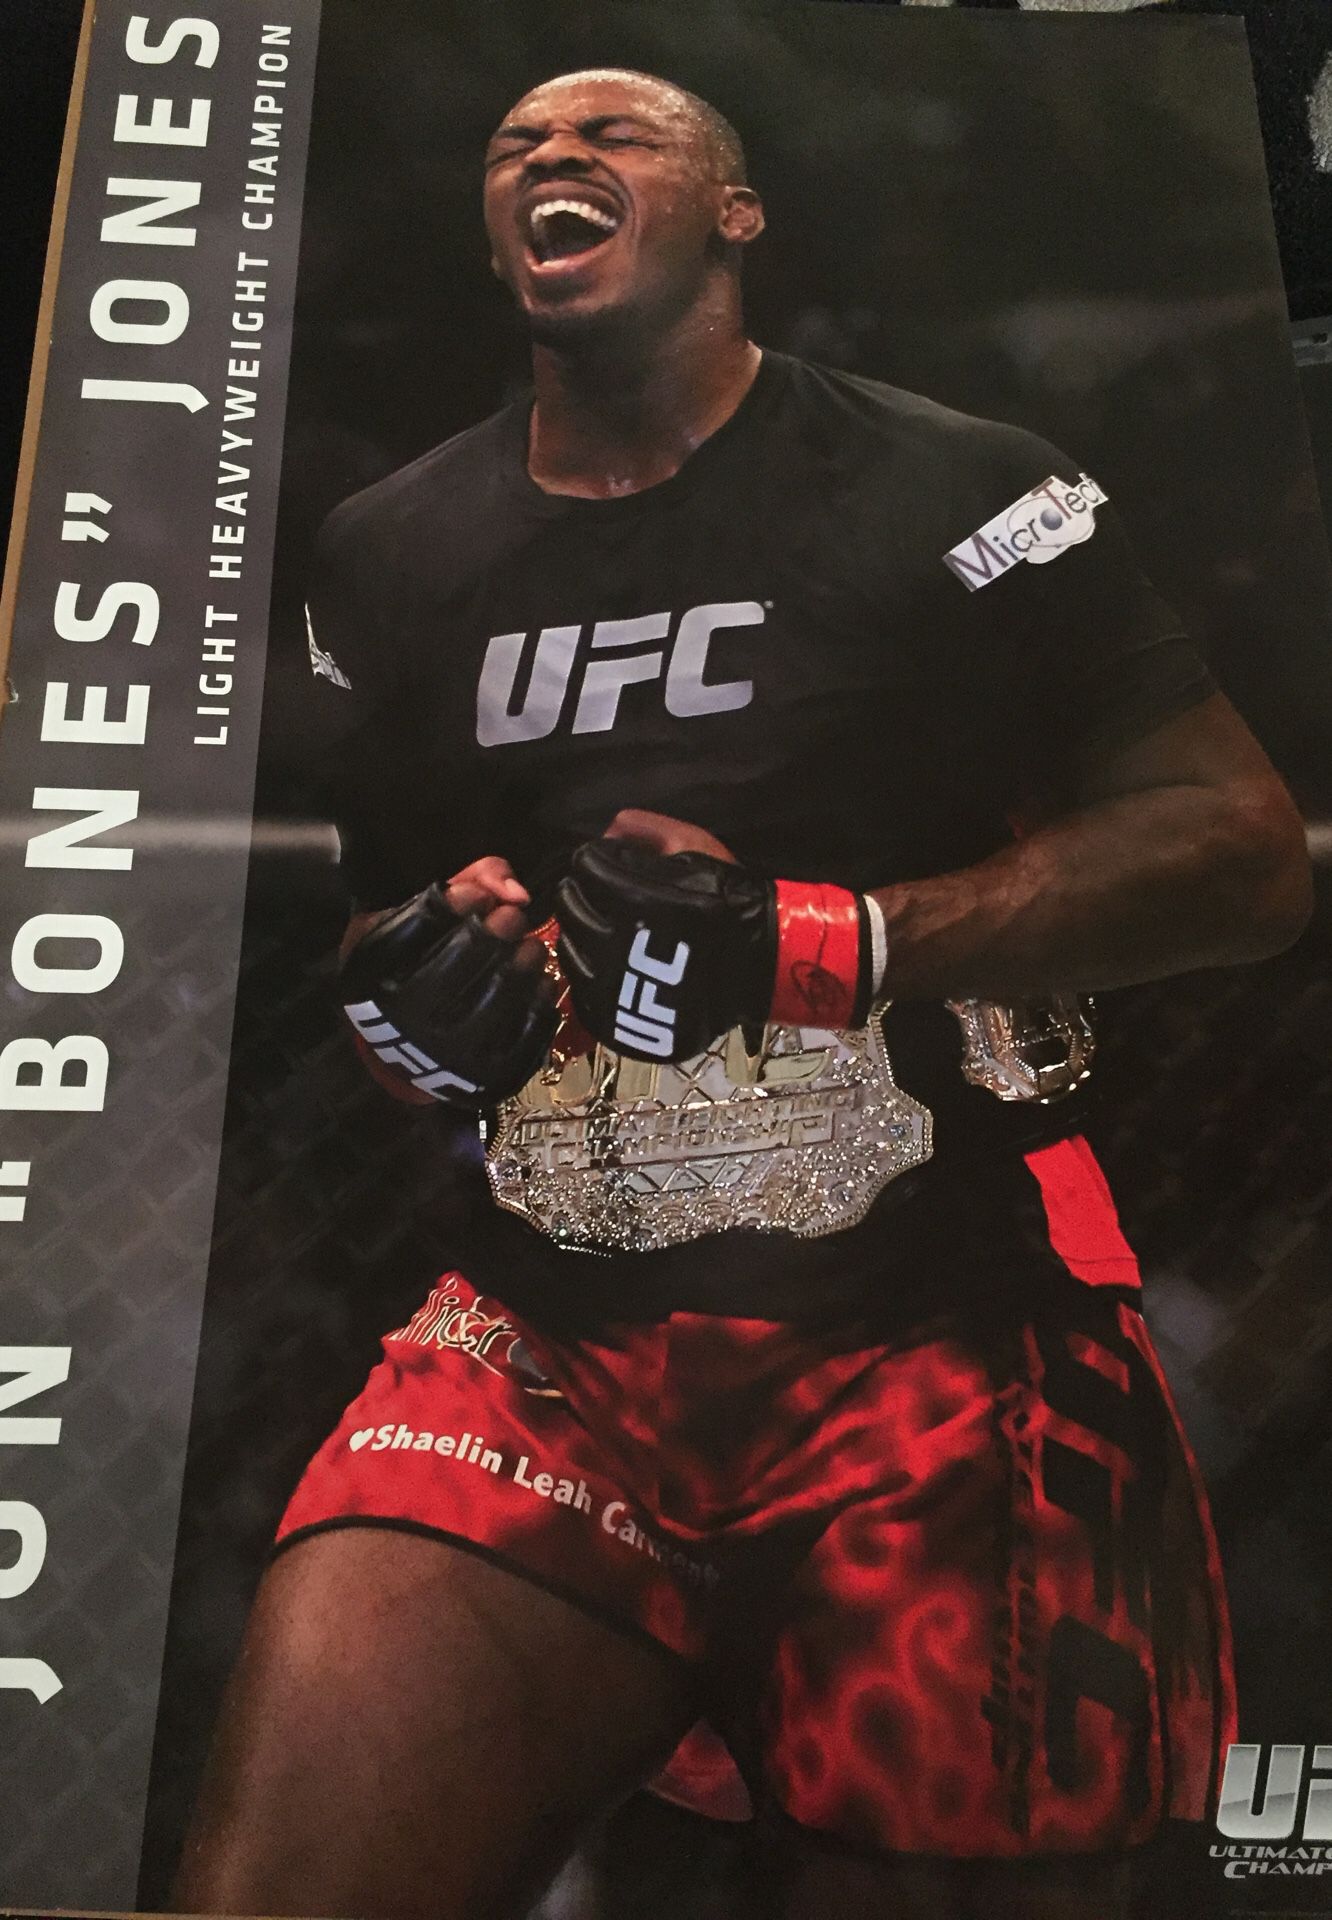 UFC posters